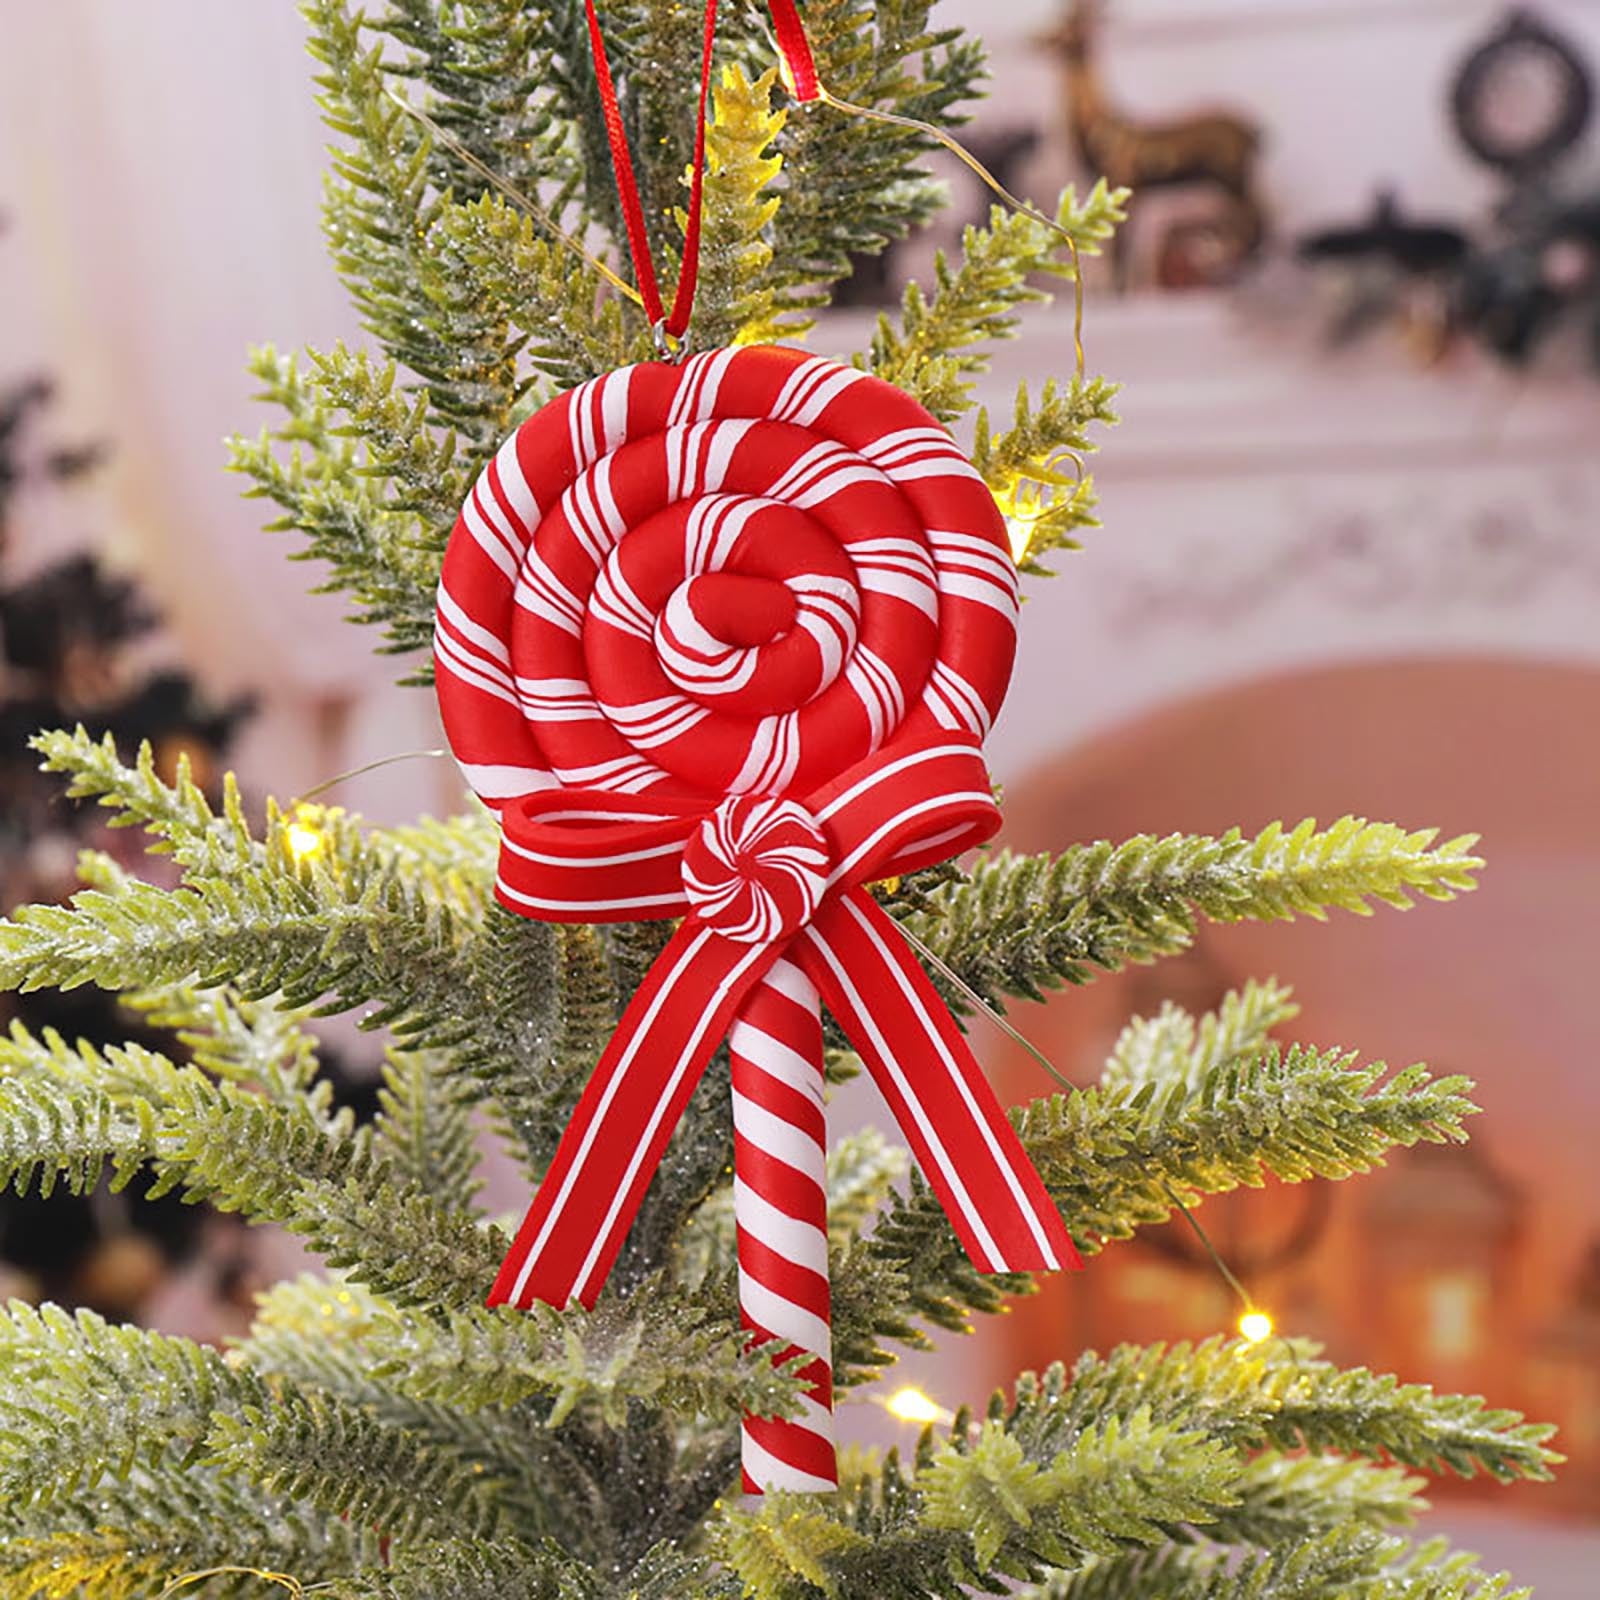 Holloyiver Christmas Tree Lollipop Hanging Ornaments, Xmas Candy Cane ...